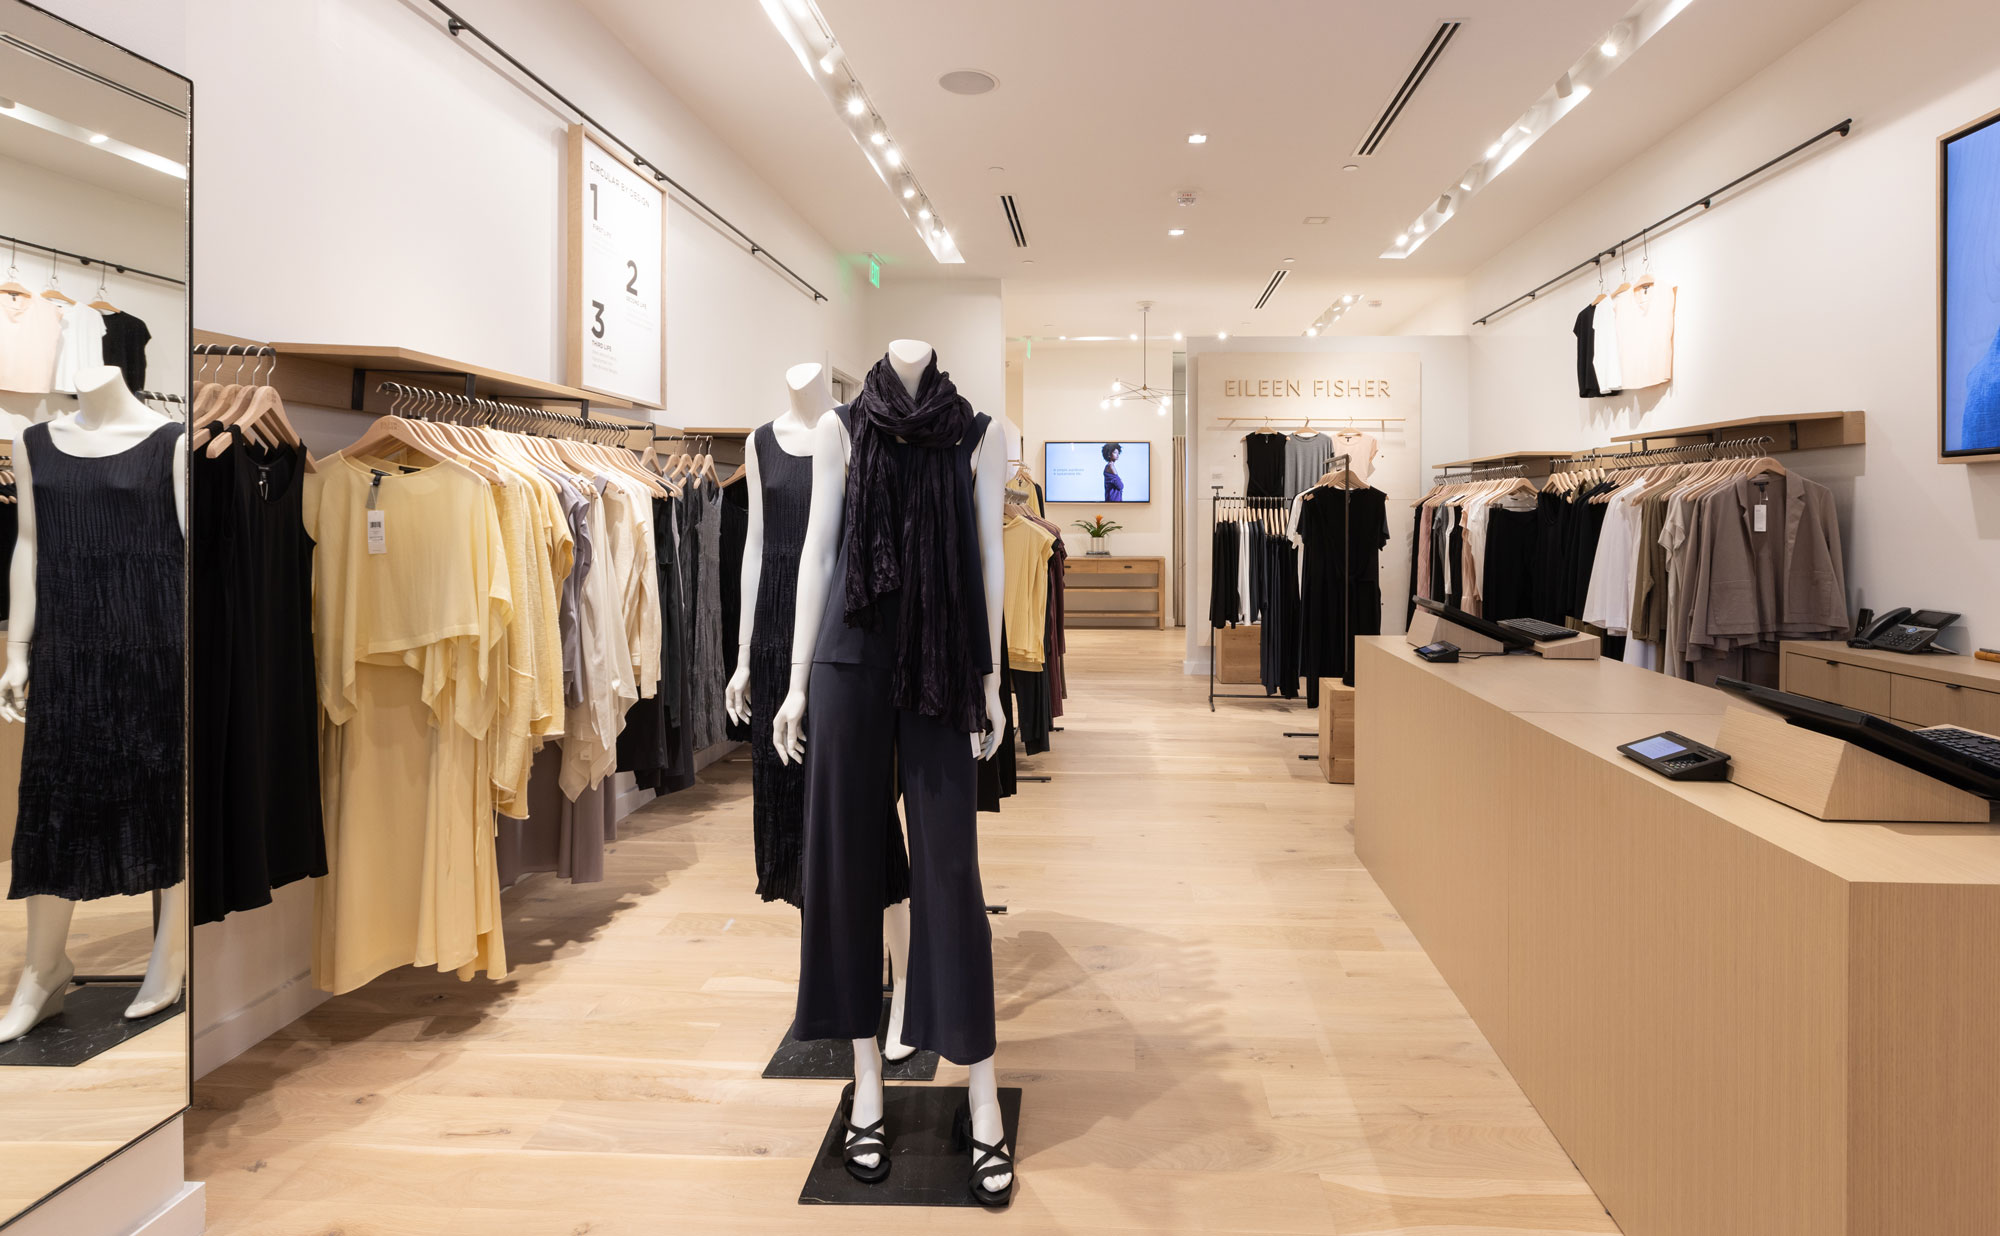 A New Eileen Fisher NorthPark Center